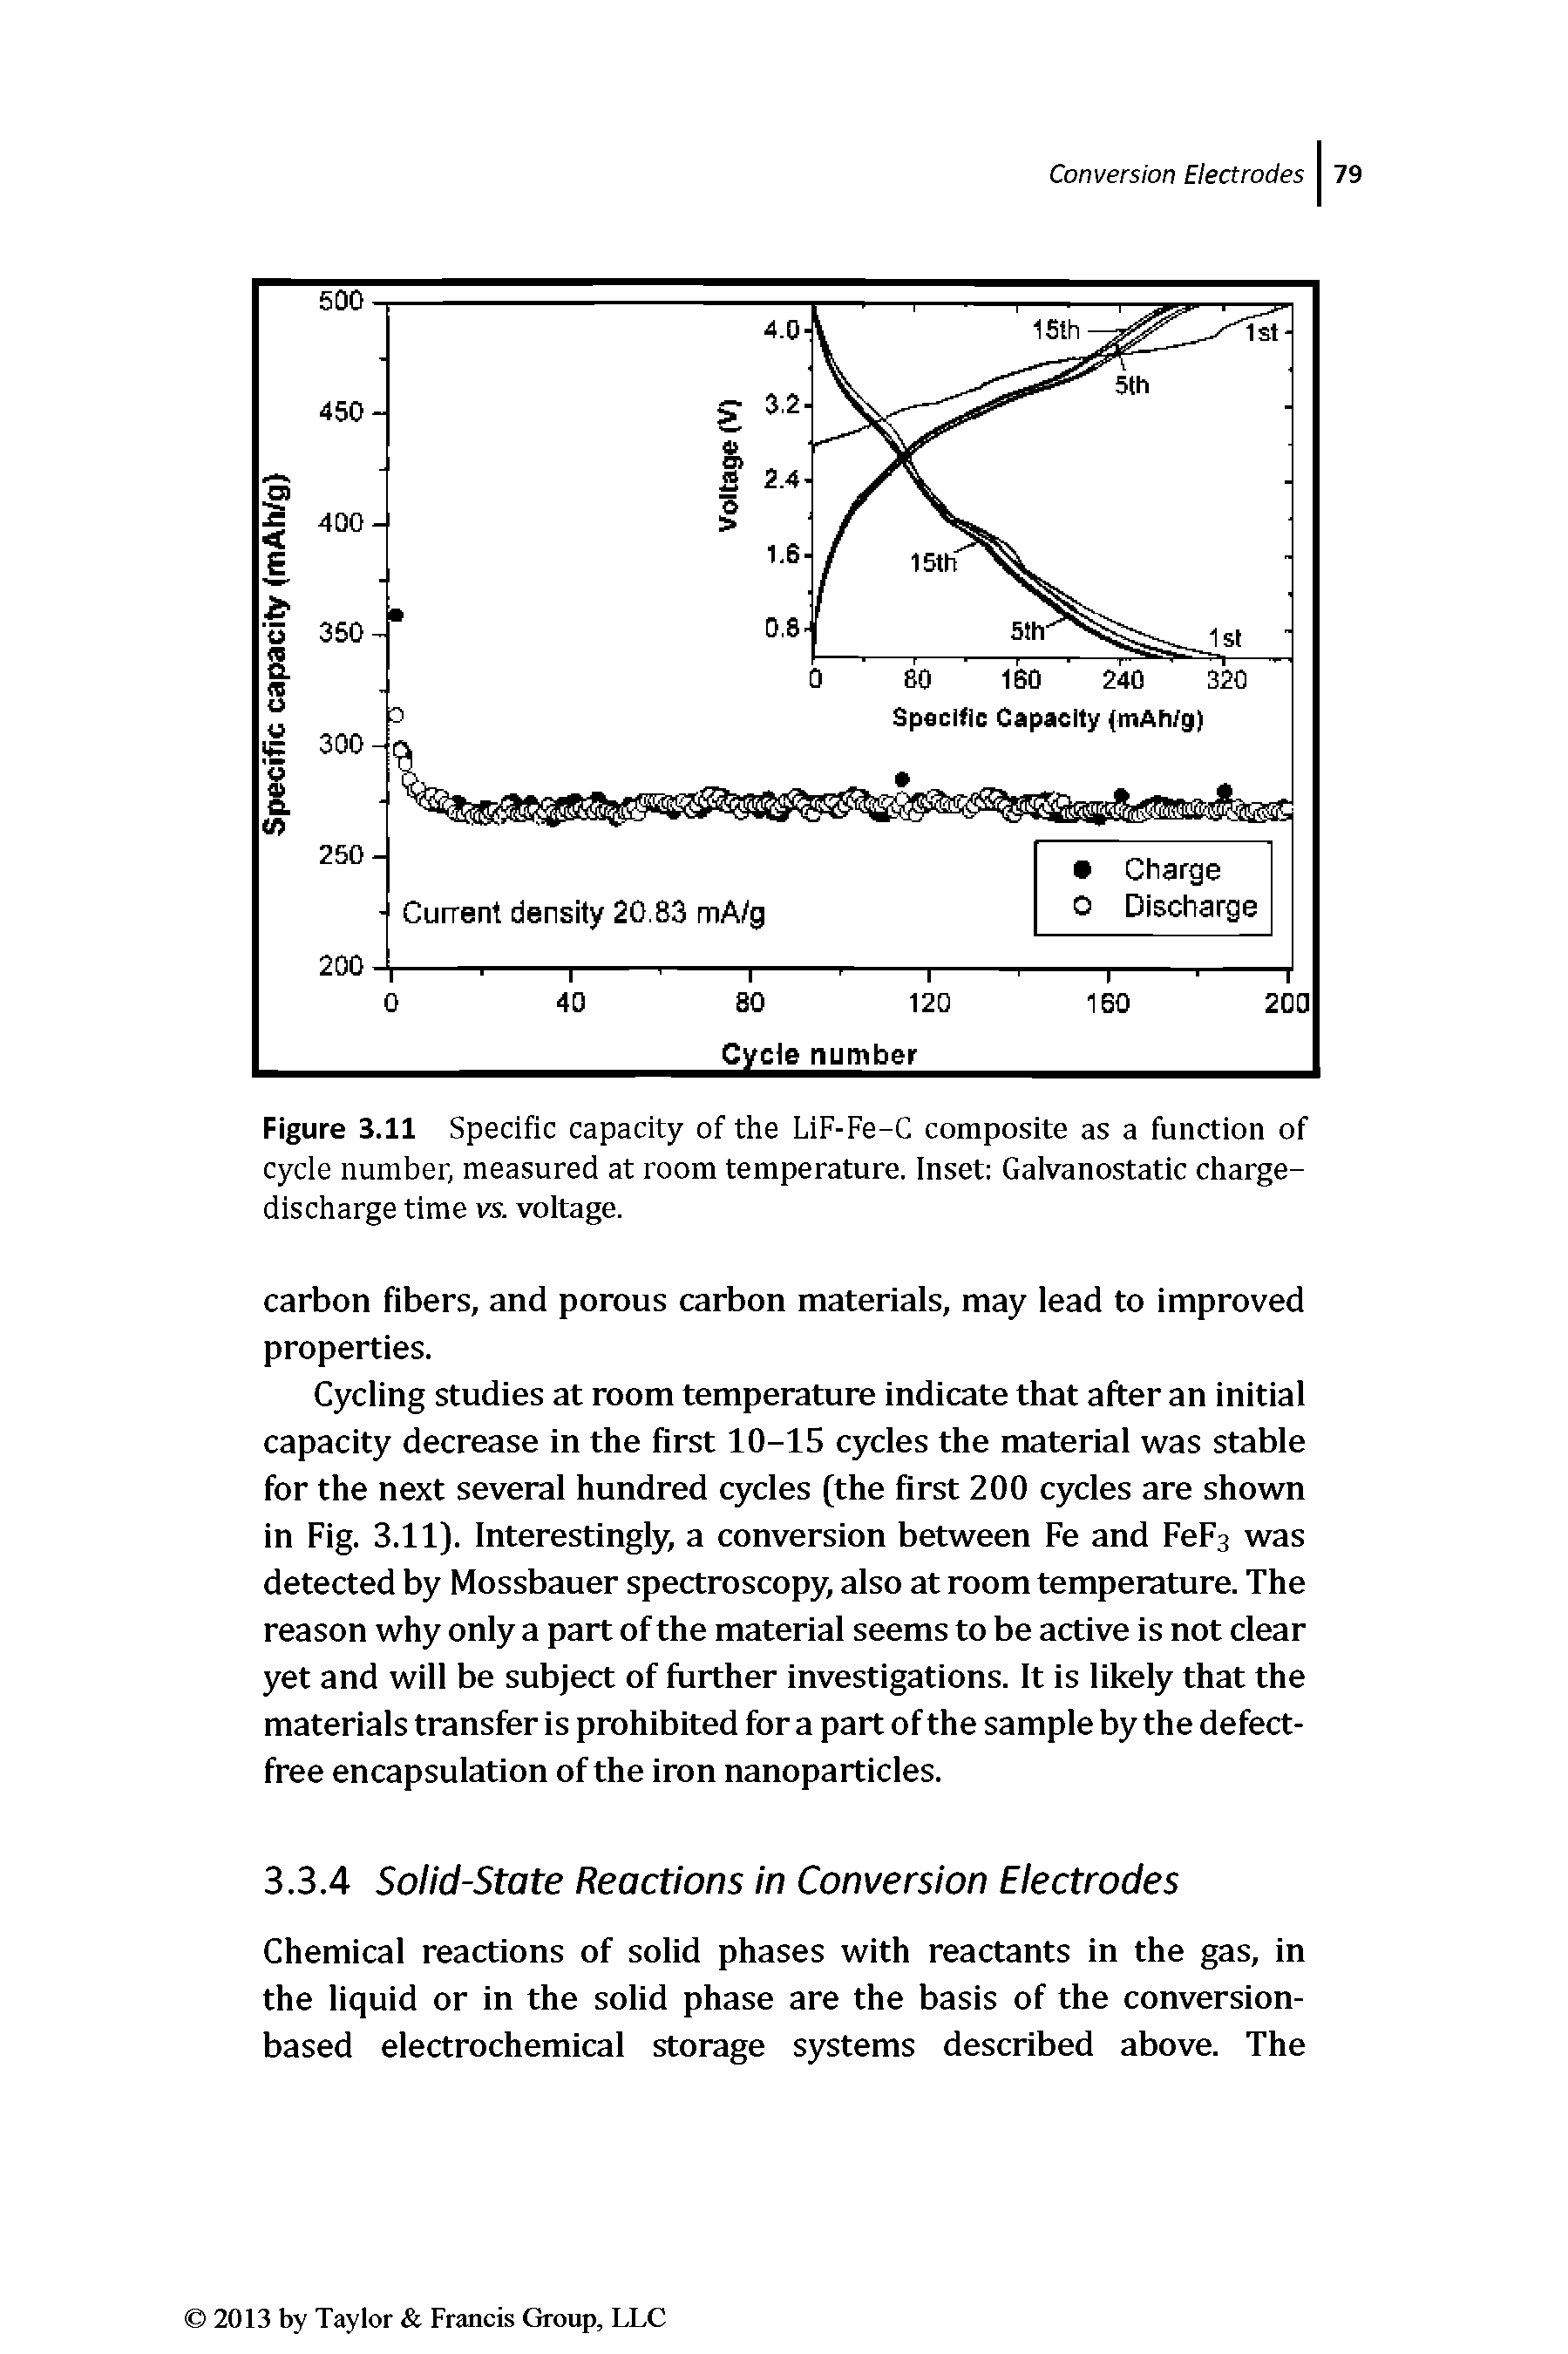 Figure 3.11 Specific capacity of the LiF-Fe-C composite as a function of cycle number, measured at room temperature. Inset Galvanostatic charge-discharge time vs. voltage.